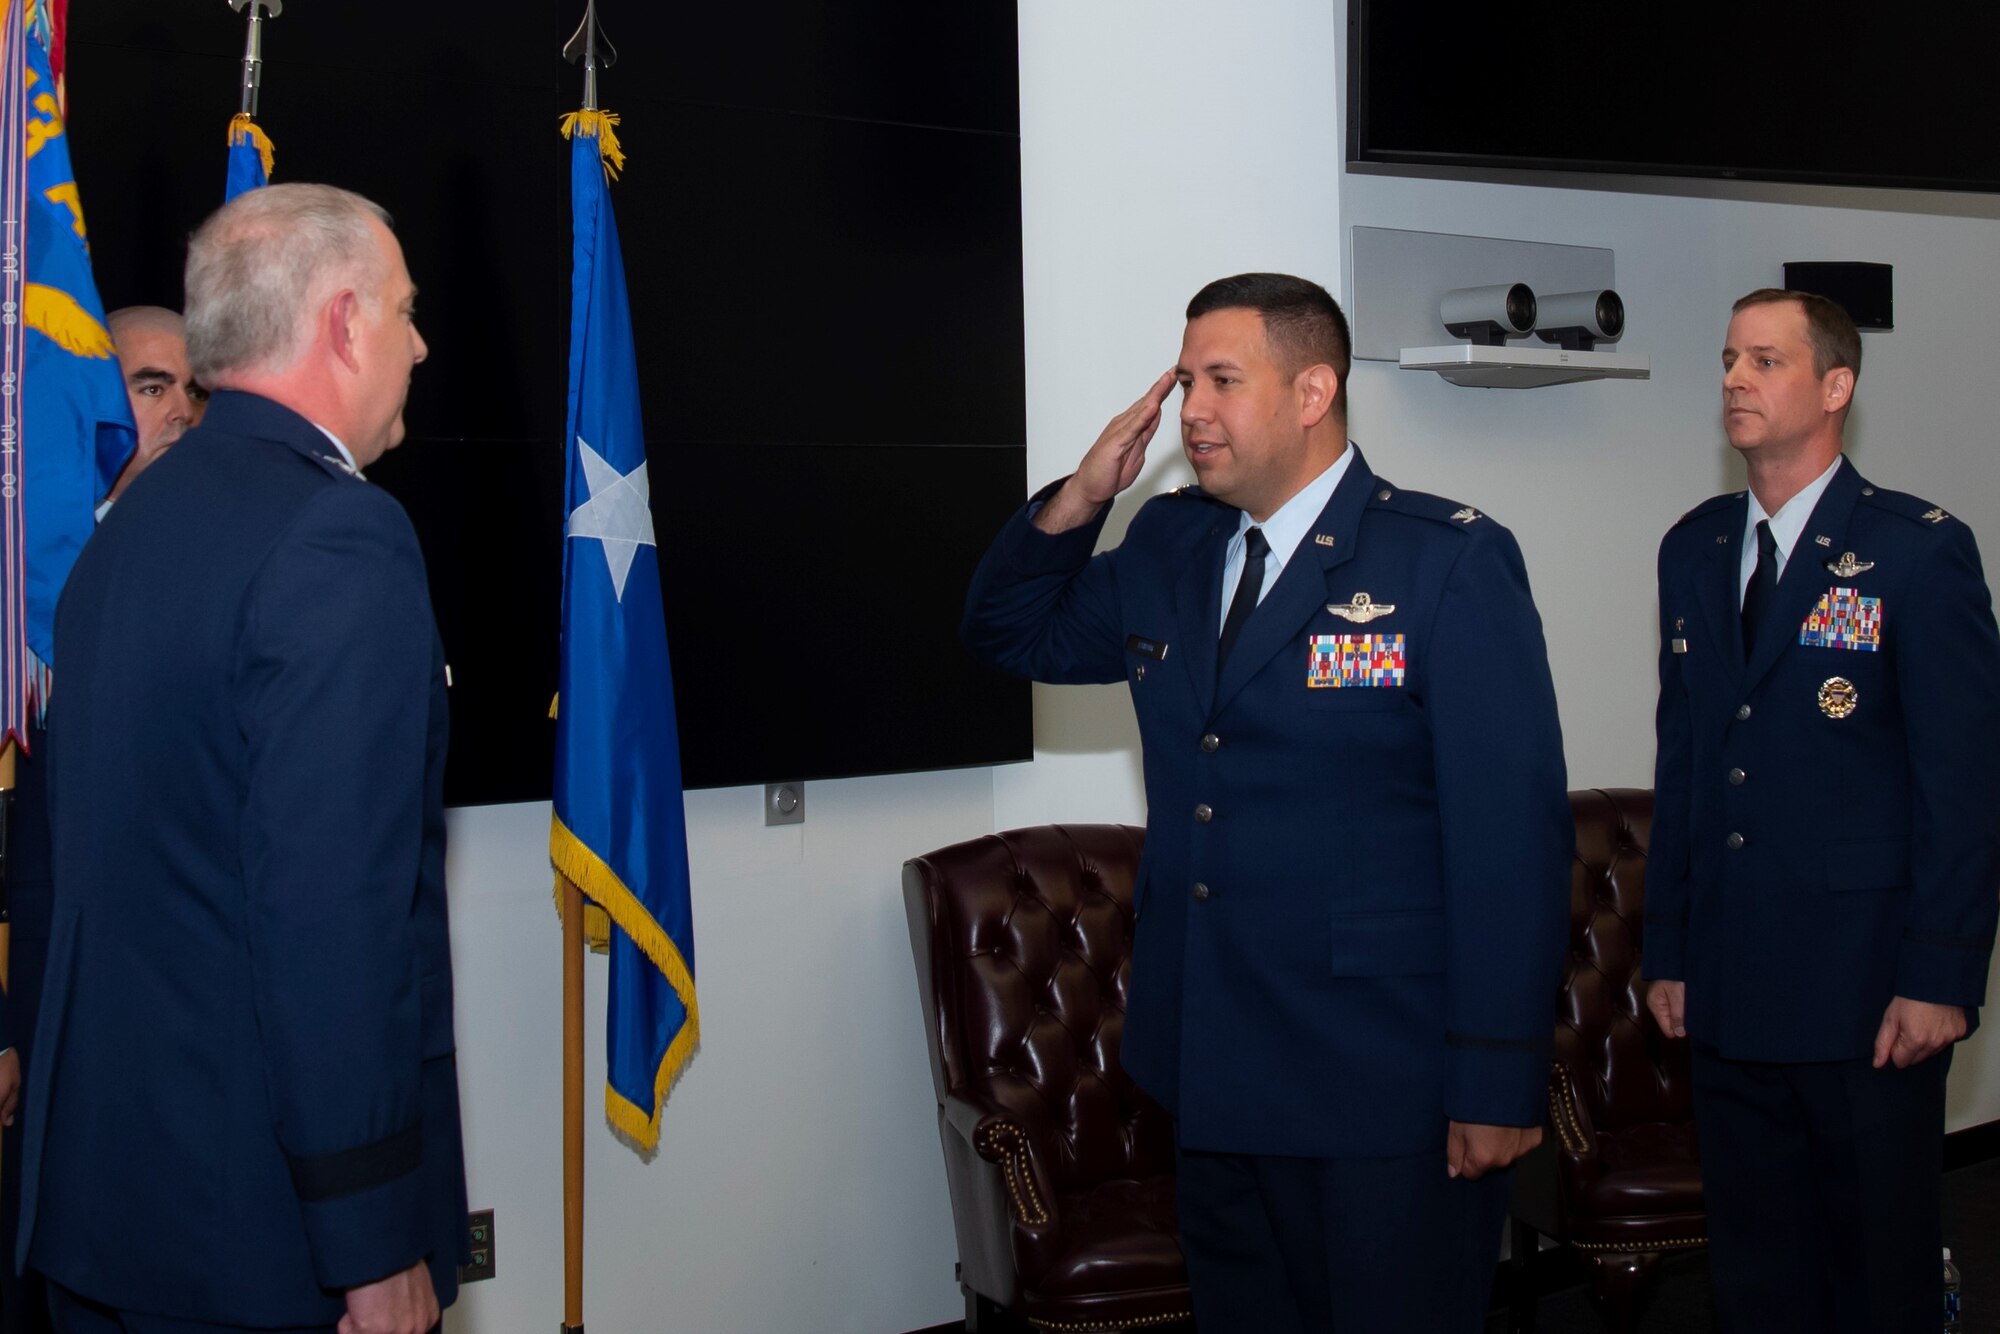 Col. Joseph "Jacko" M. Vanoni (center) assumes command of the 43d Air Mobility Operations Group from Col. Timothy S. Danielson (right). Maj. Gen. John R. Gordy (left), commander of the U.S. Air Force Expeditionary Center at Joint Base McGuire-Dix-Lakehurst, N.J., presided over the change of command ceremony.